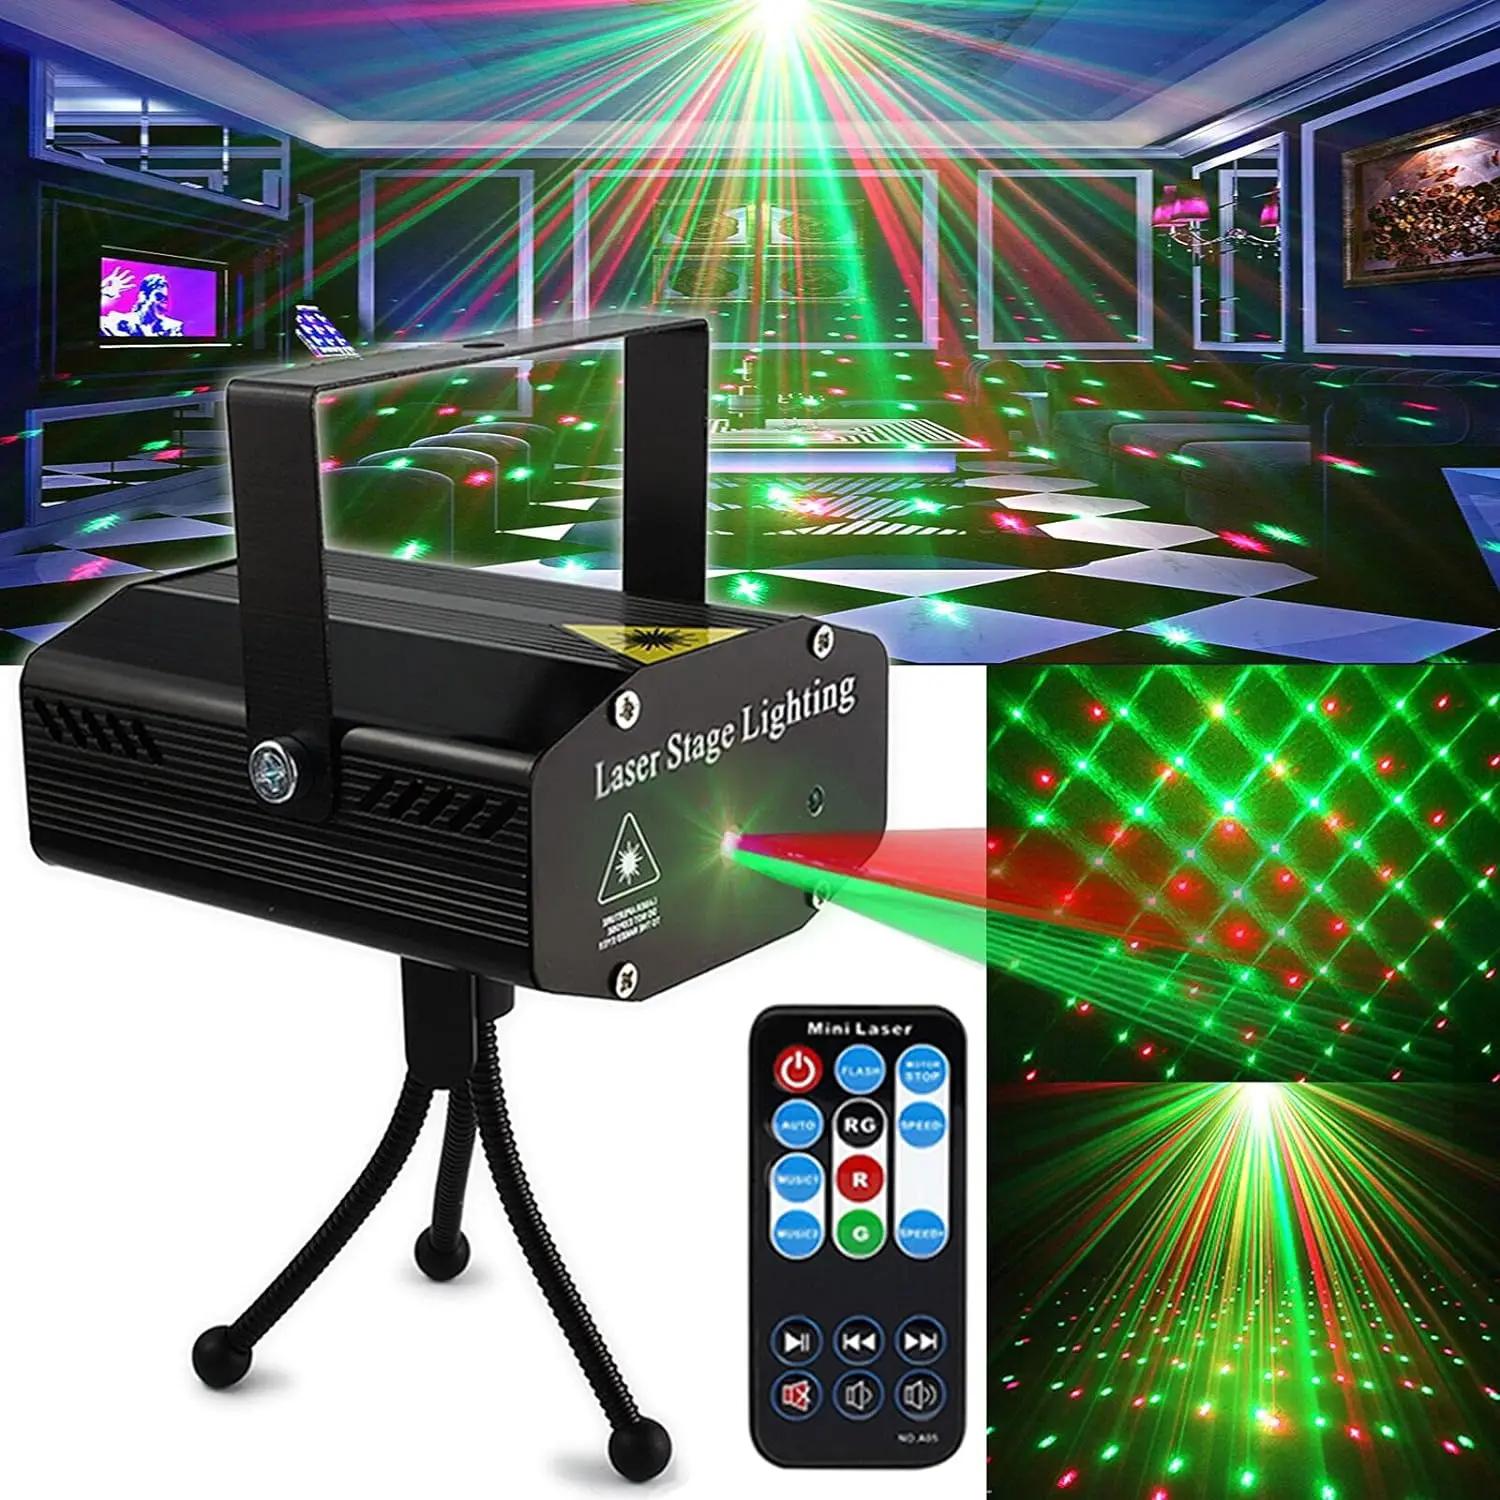 

Party Lights,Disco DJ Lights Strobe Light Rave Stage Light Club Light Sound Activated with Remote Control for Parties Bar KTV